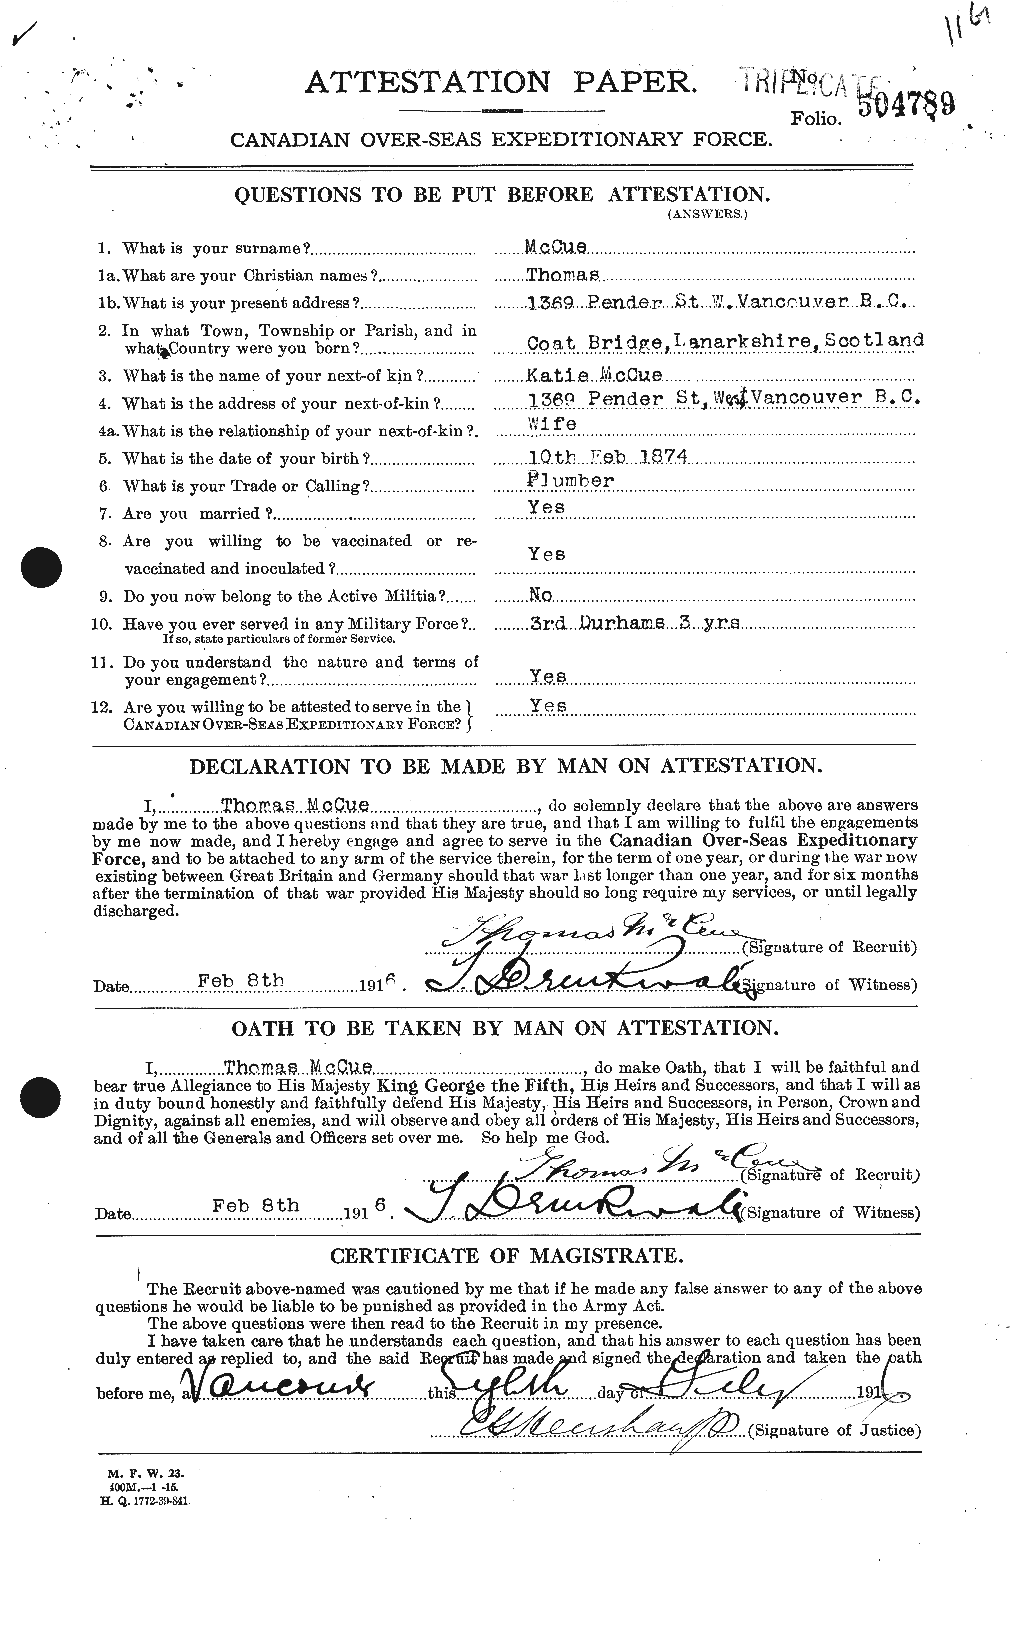 Personnel Records of the First World War - CEF 135450a